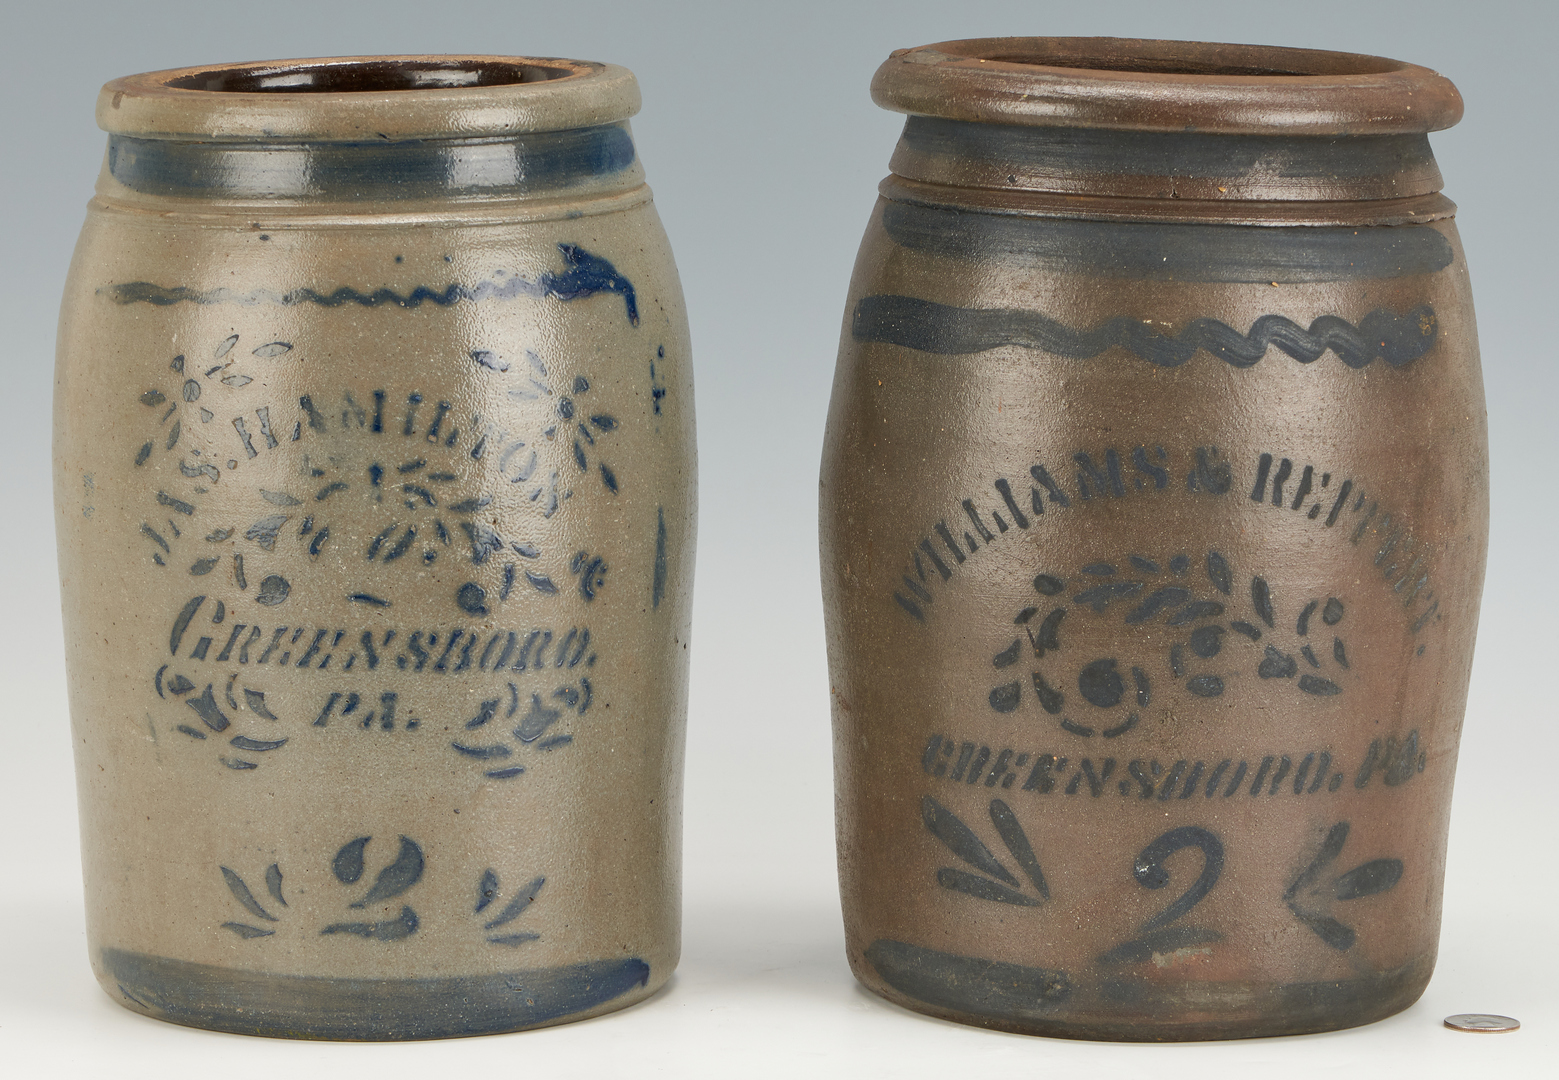 Lot 265: Two (2) Greensboro, PA Cobalt Stenciled &. Decorated Stoneware Jars